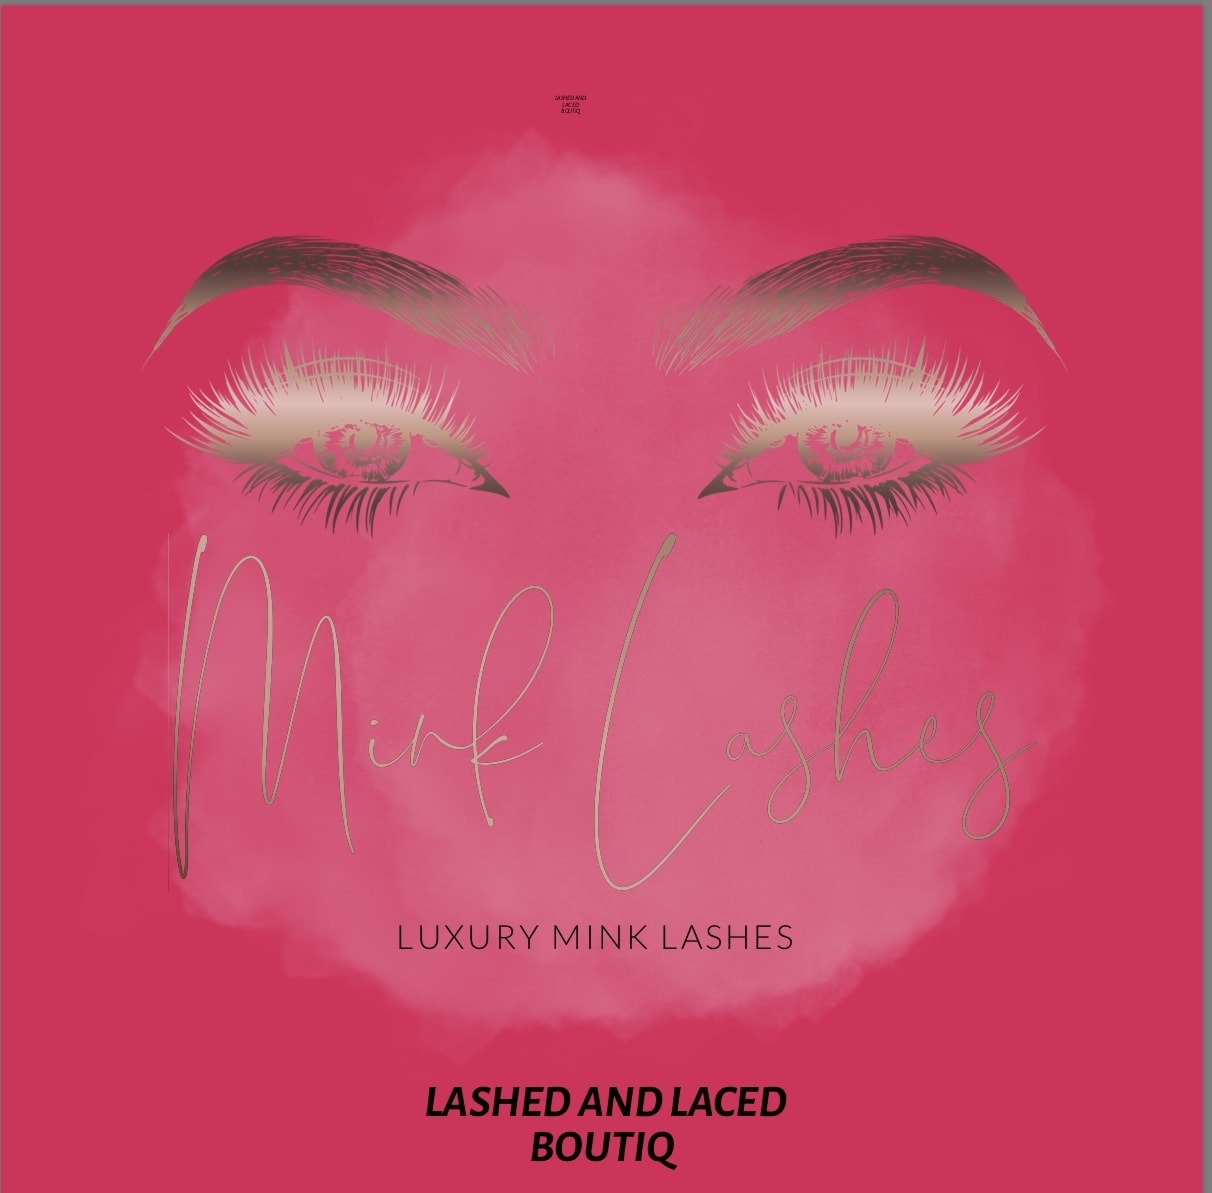 Lashed and Laced Boutiq